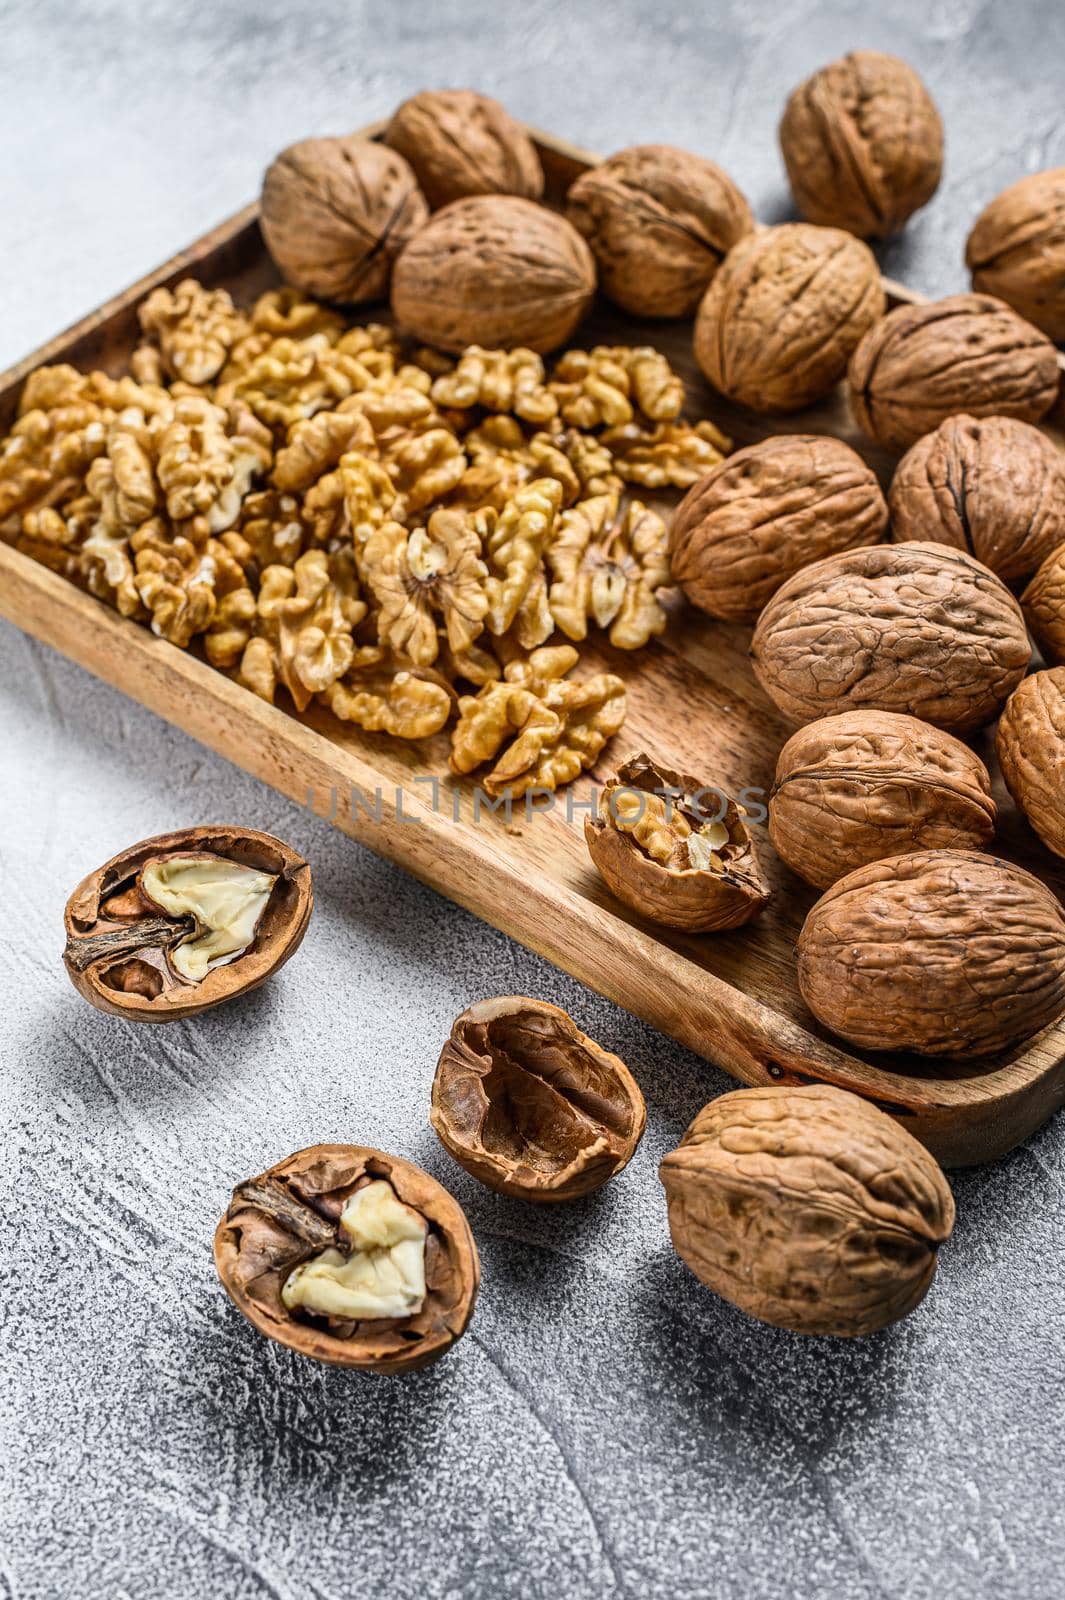 Walnuts in a wooden plate and walnut kernels. Gray background. Top view by Composter